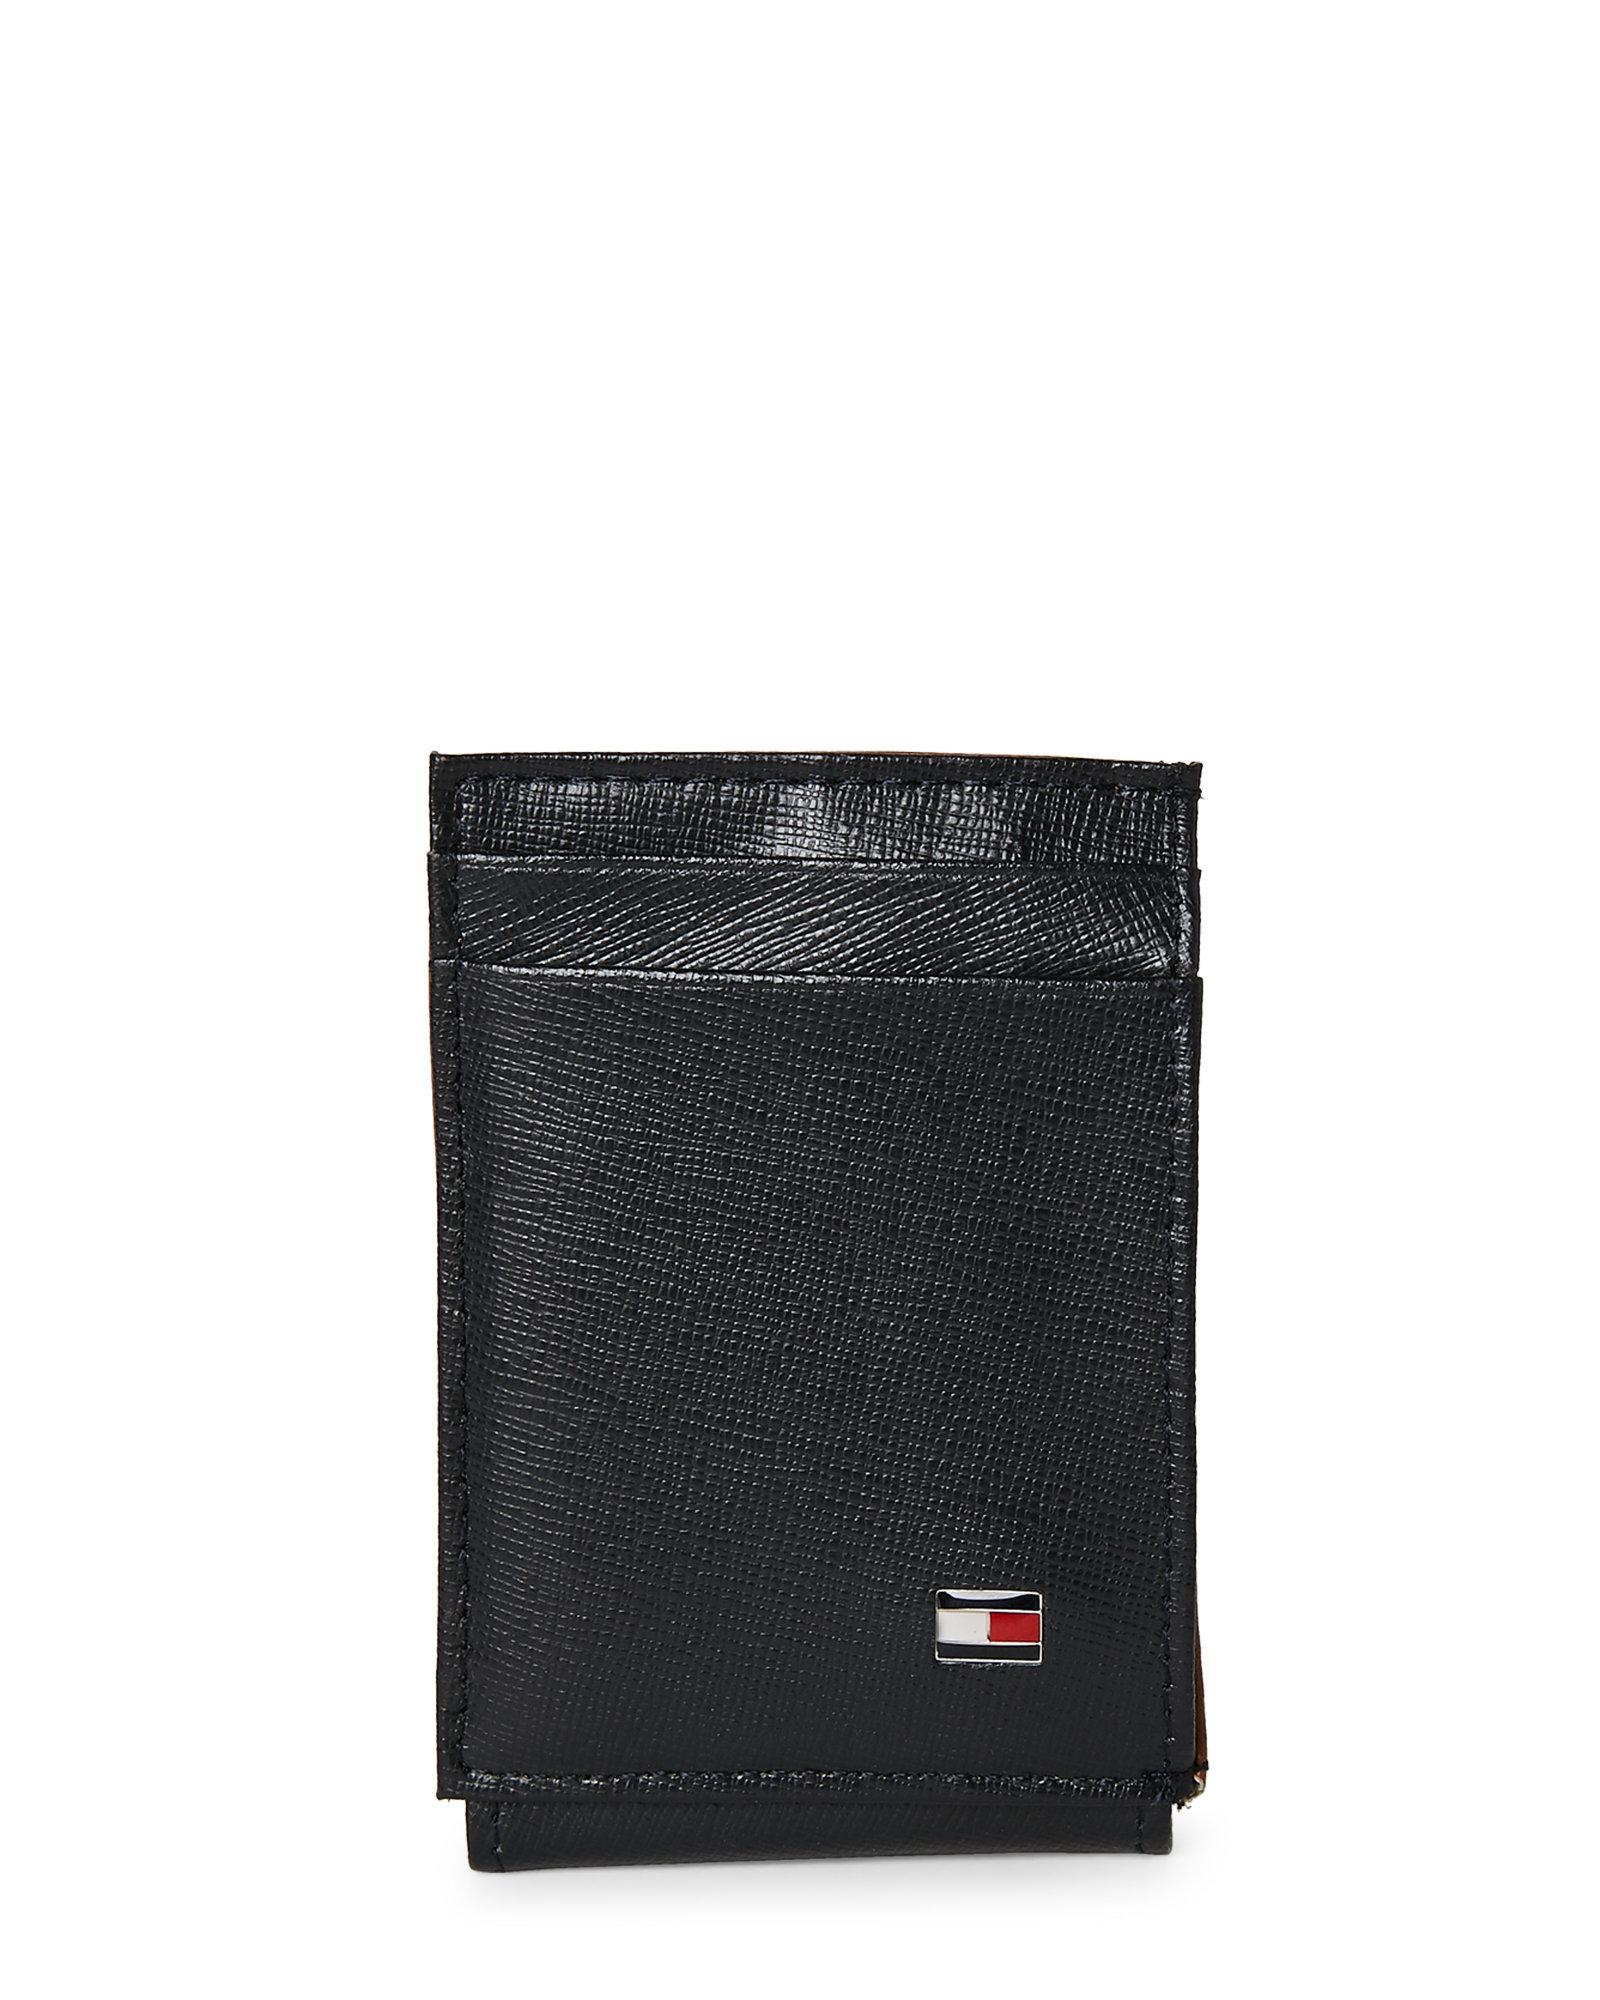 Tommy Hilfiger Saffiano Leather 